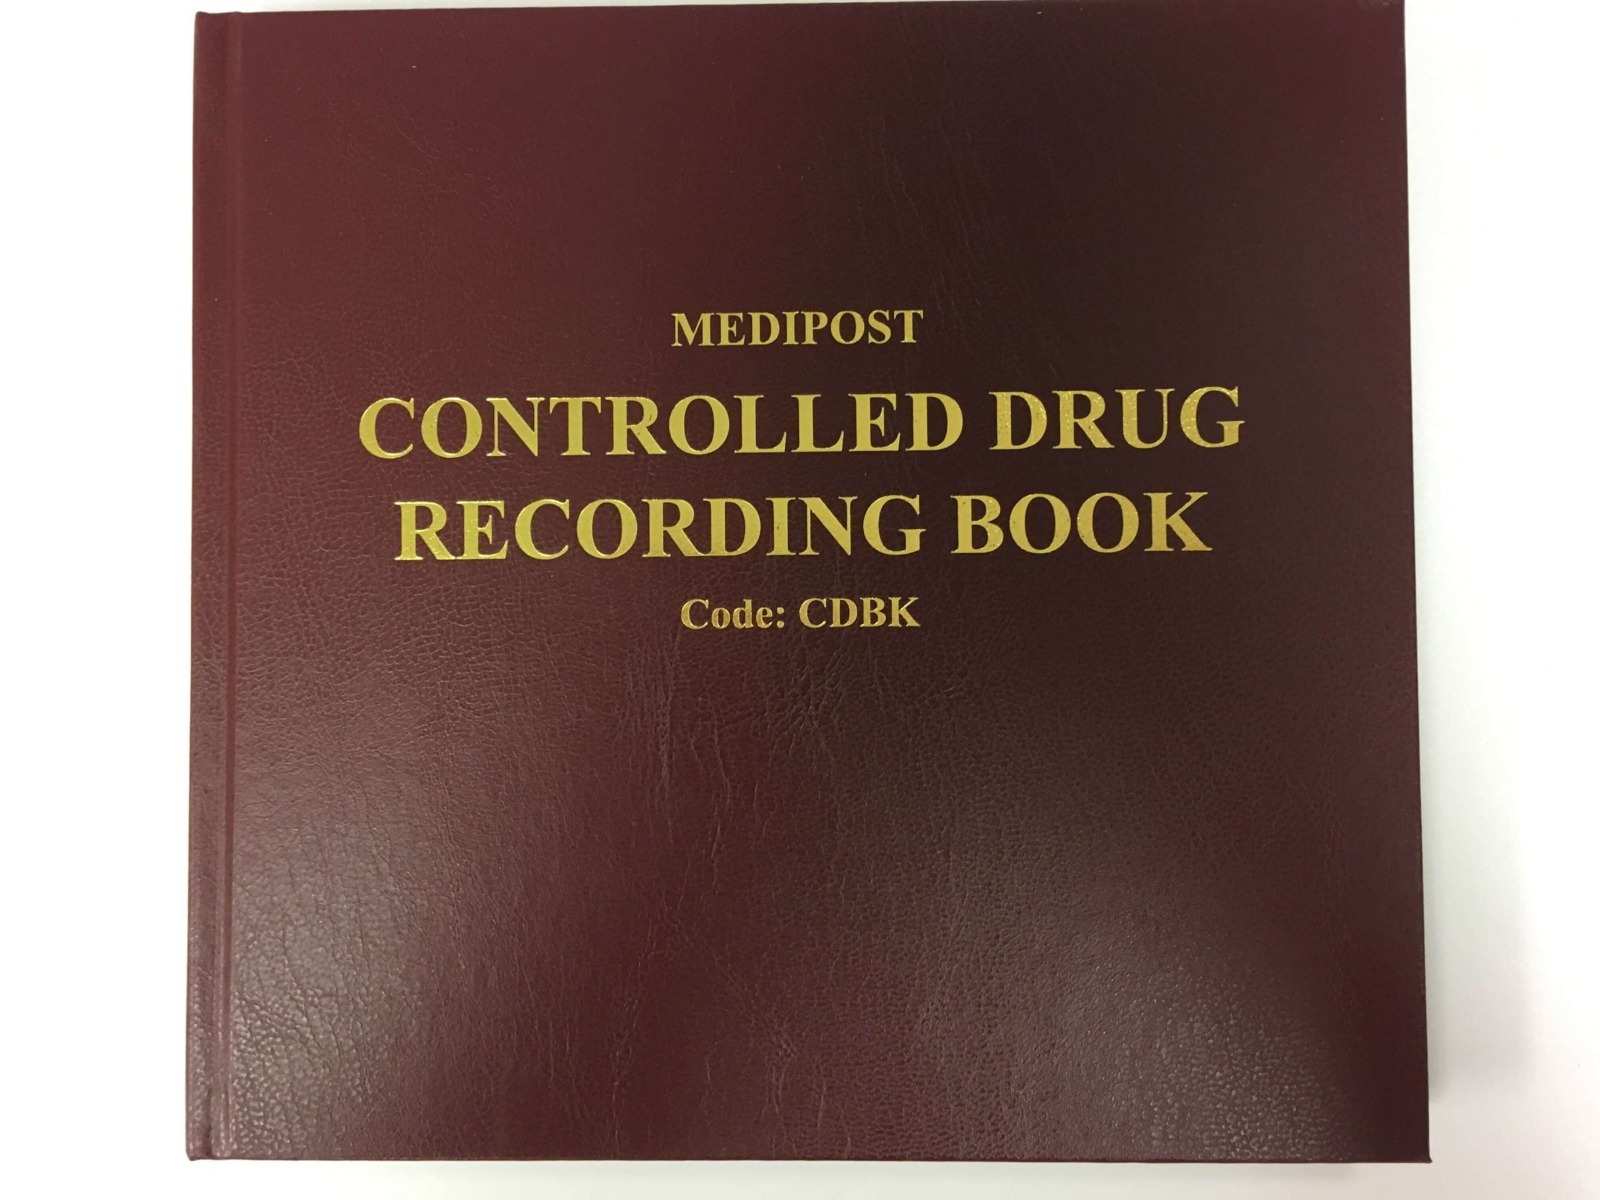 Controlled Drug Recording Book - Each